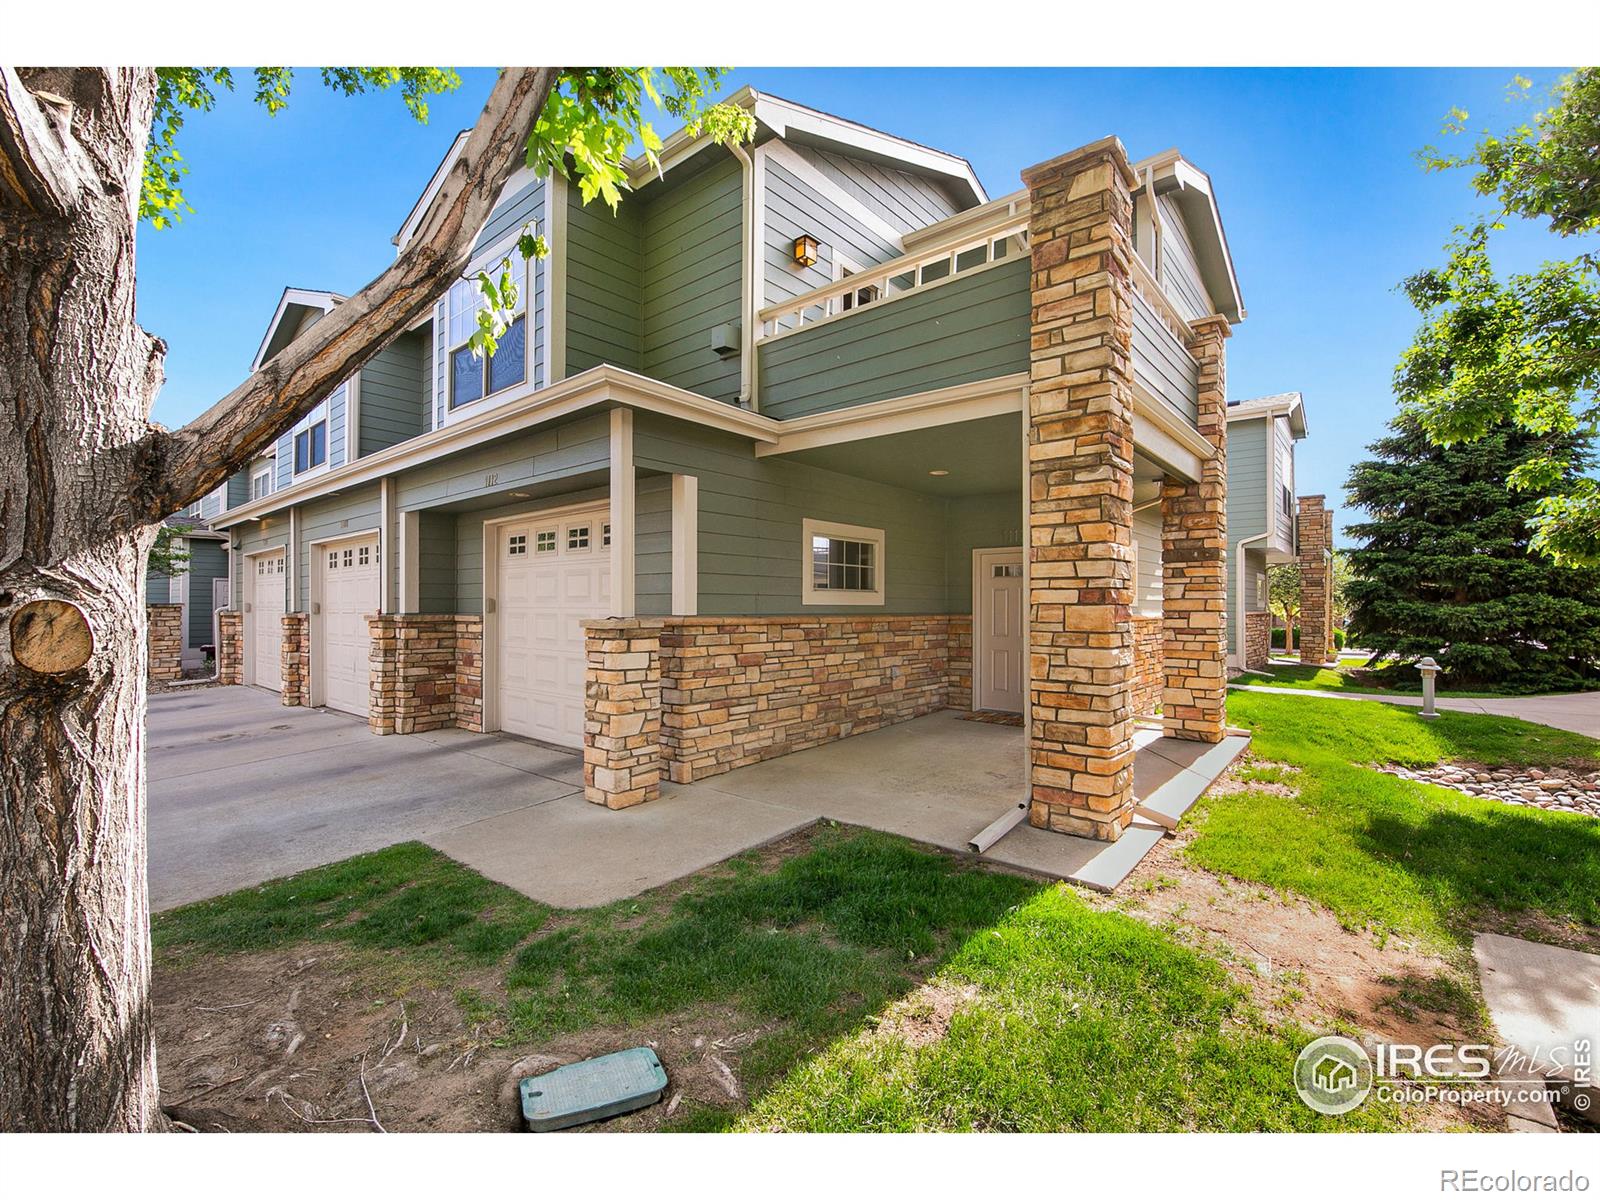 5775 29th, Greeley, CO